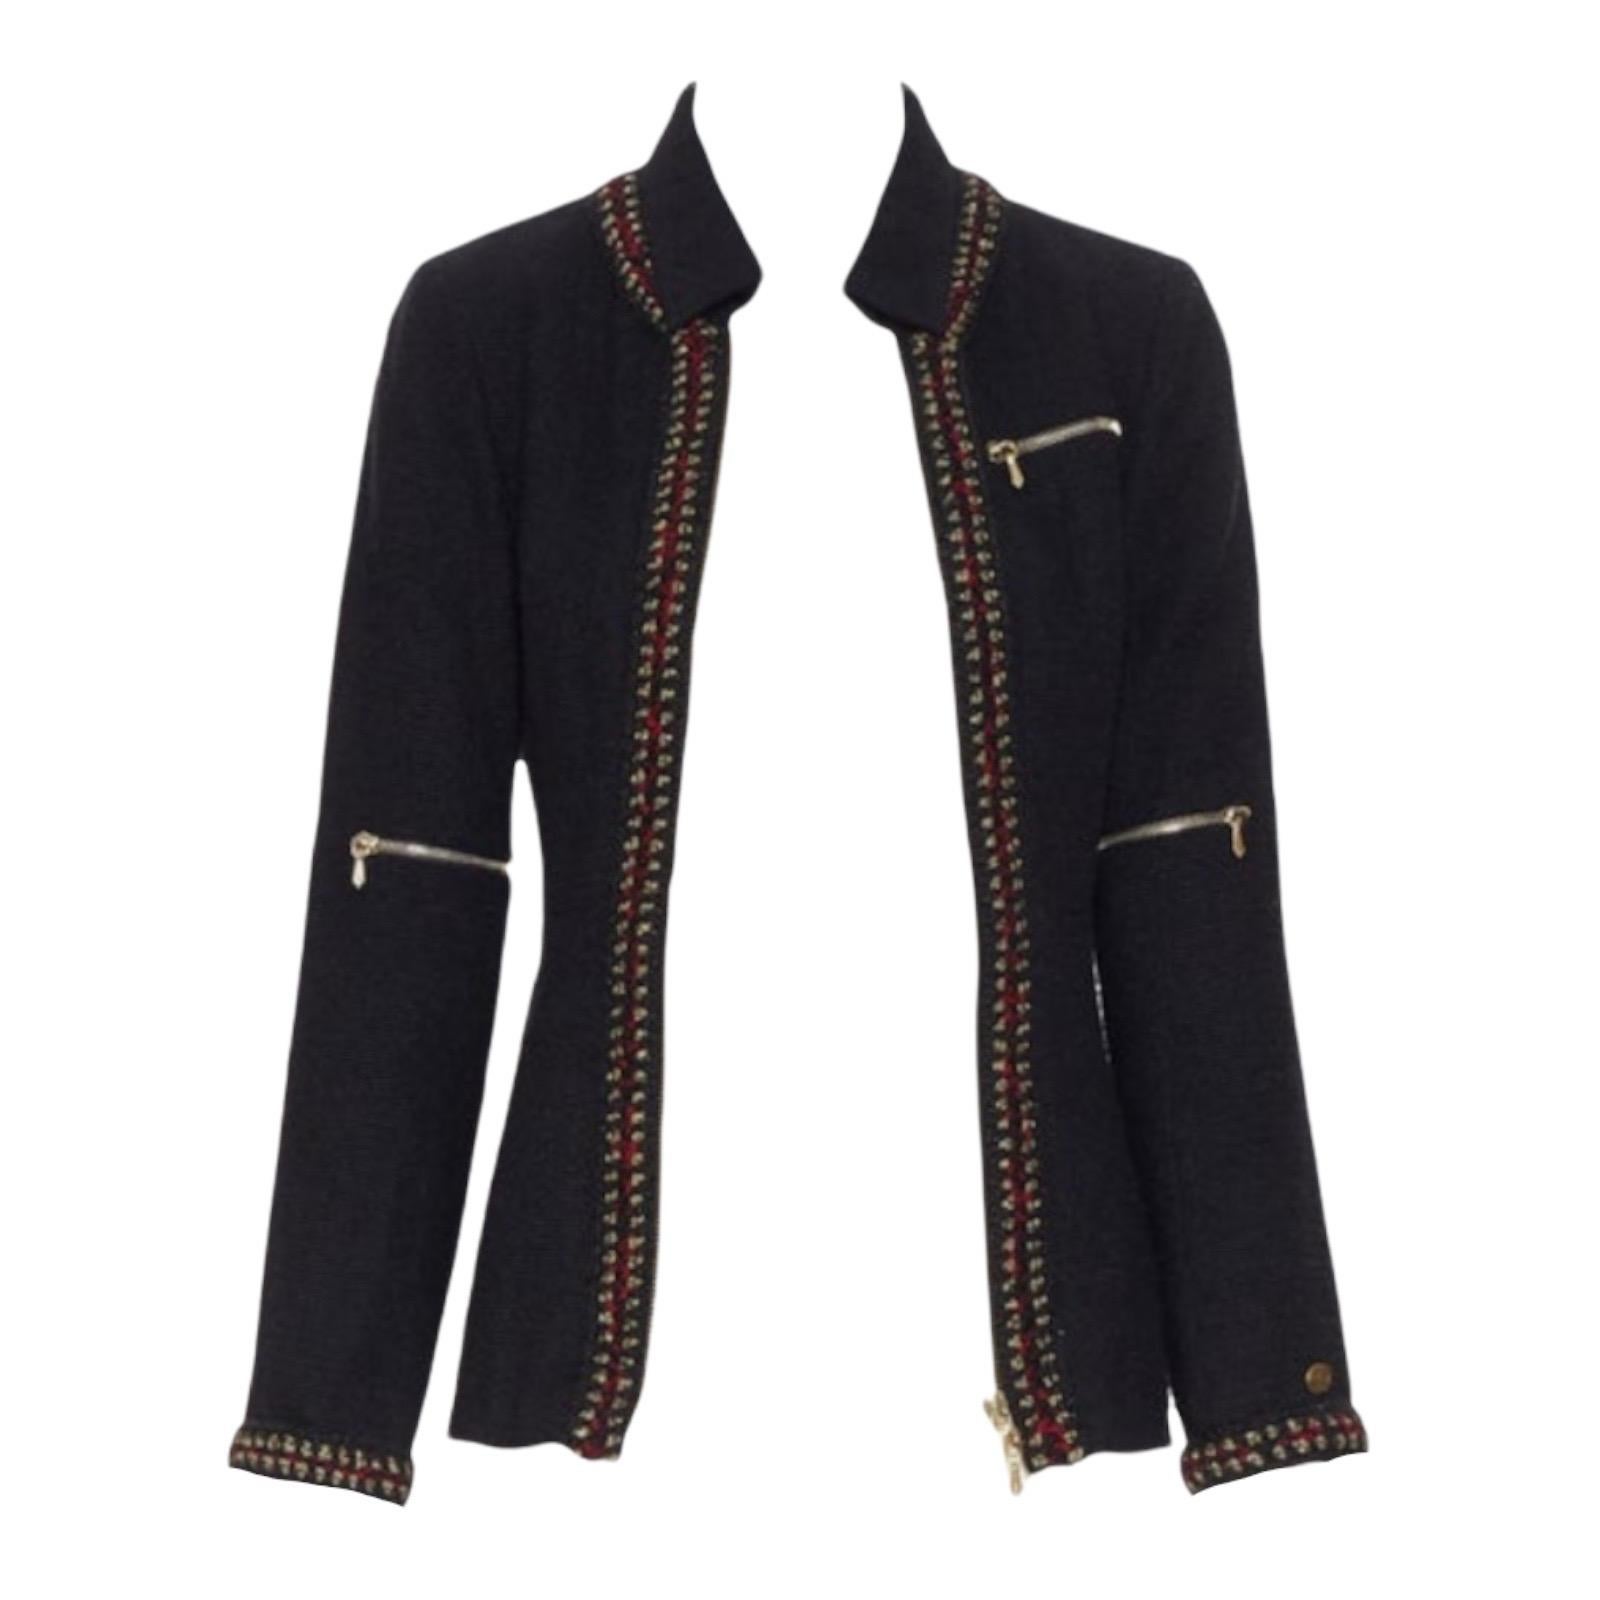 Chanel Shanghai Métiers d'Art Jacket
A timeless classic that should be in every woman's wardrobe
Finest boucle tweed fabric exclusively produced by Maison Lesage for Chanel
Metallic braided details
Closes with two-way zippere
Beautiful zipper